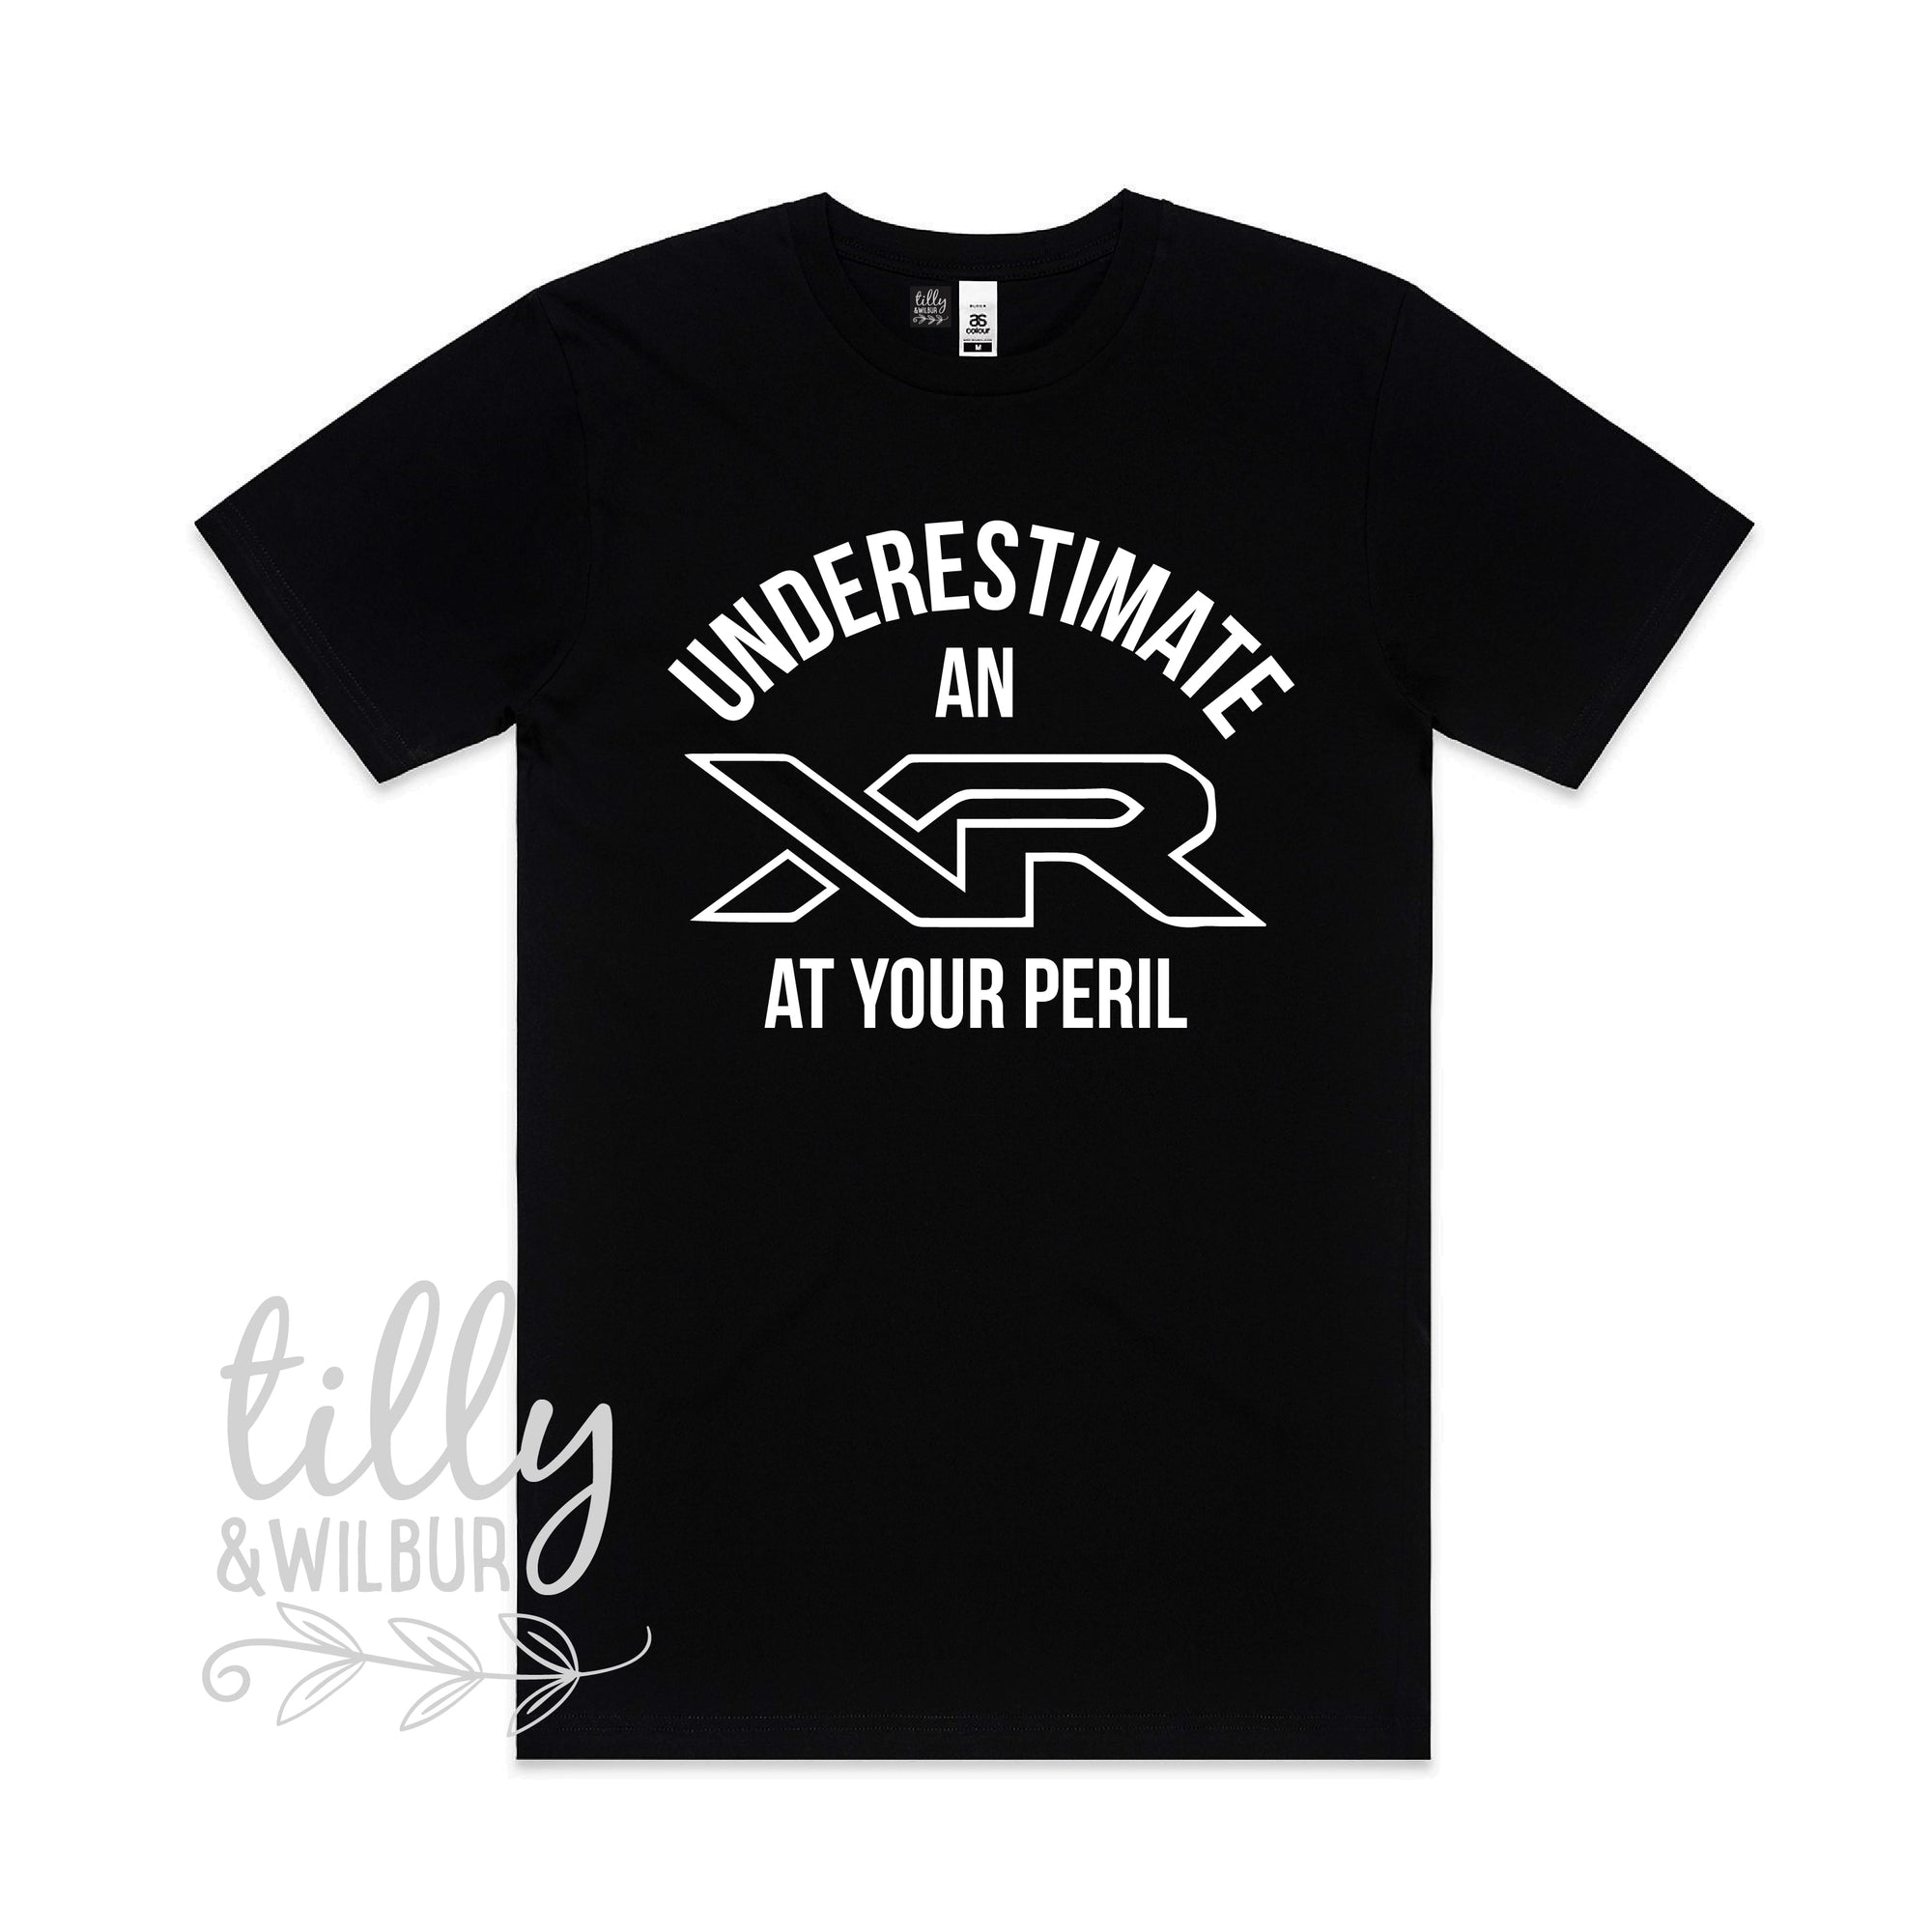 Underestimate An XR At Your Peril T-Shirt